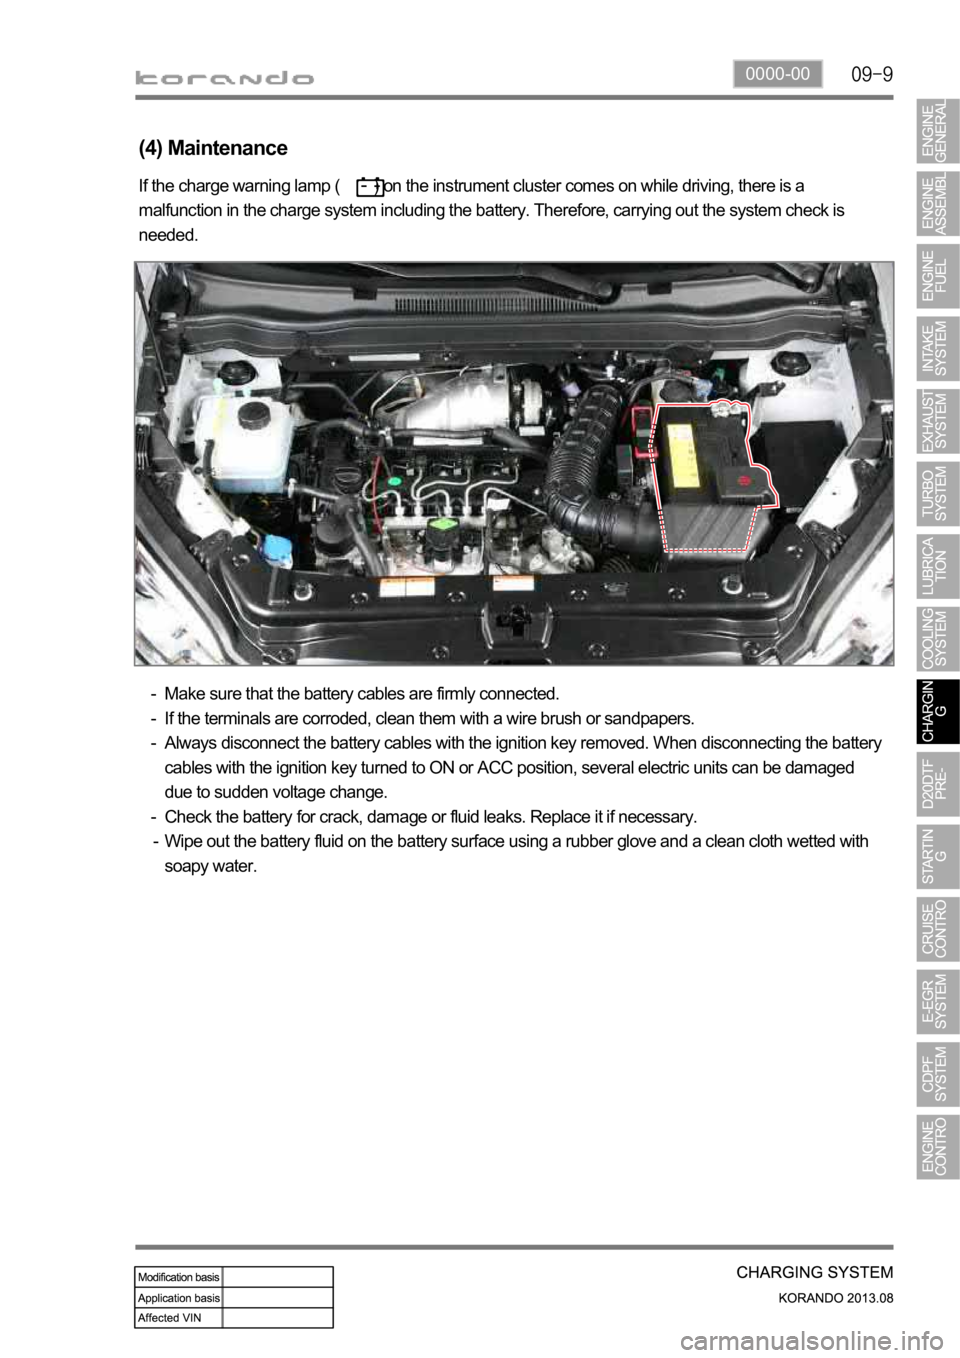 SSANGYONG KORANDO 2013  Service Manual 0000-00
(4) Maintenance
Make sure that the battery cables are firmly connected.
If the terminals are corroded, clean them with a wire brush or sandpapers.
Always disconnect the battery cables with the